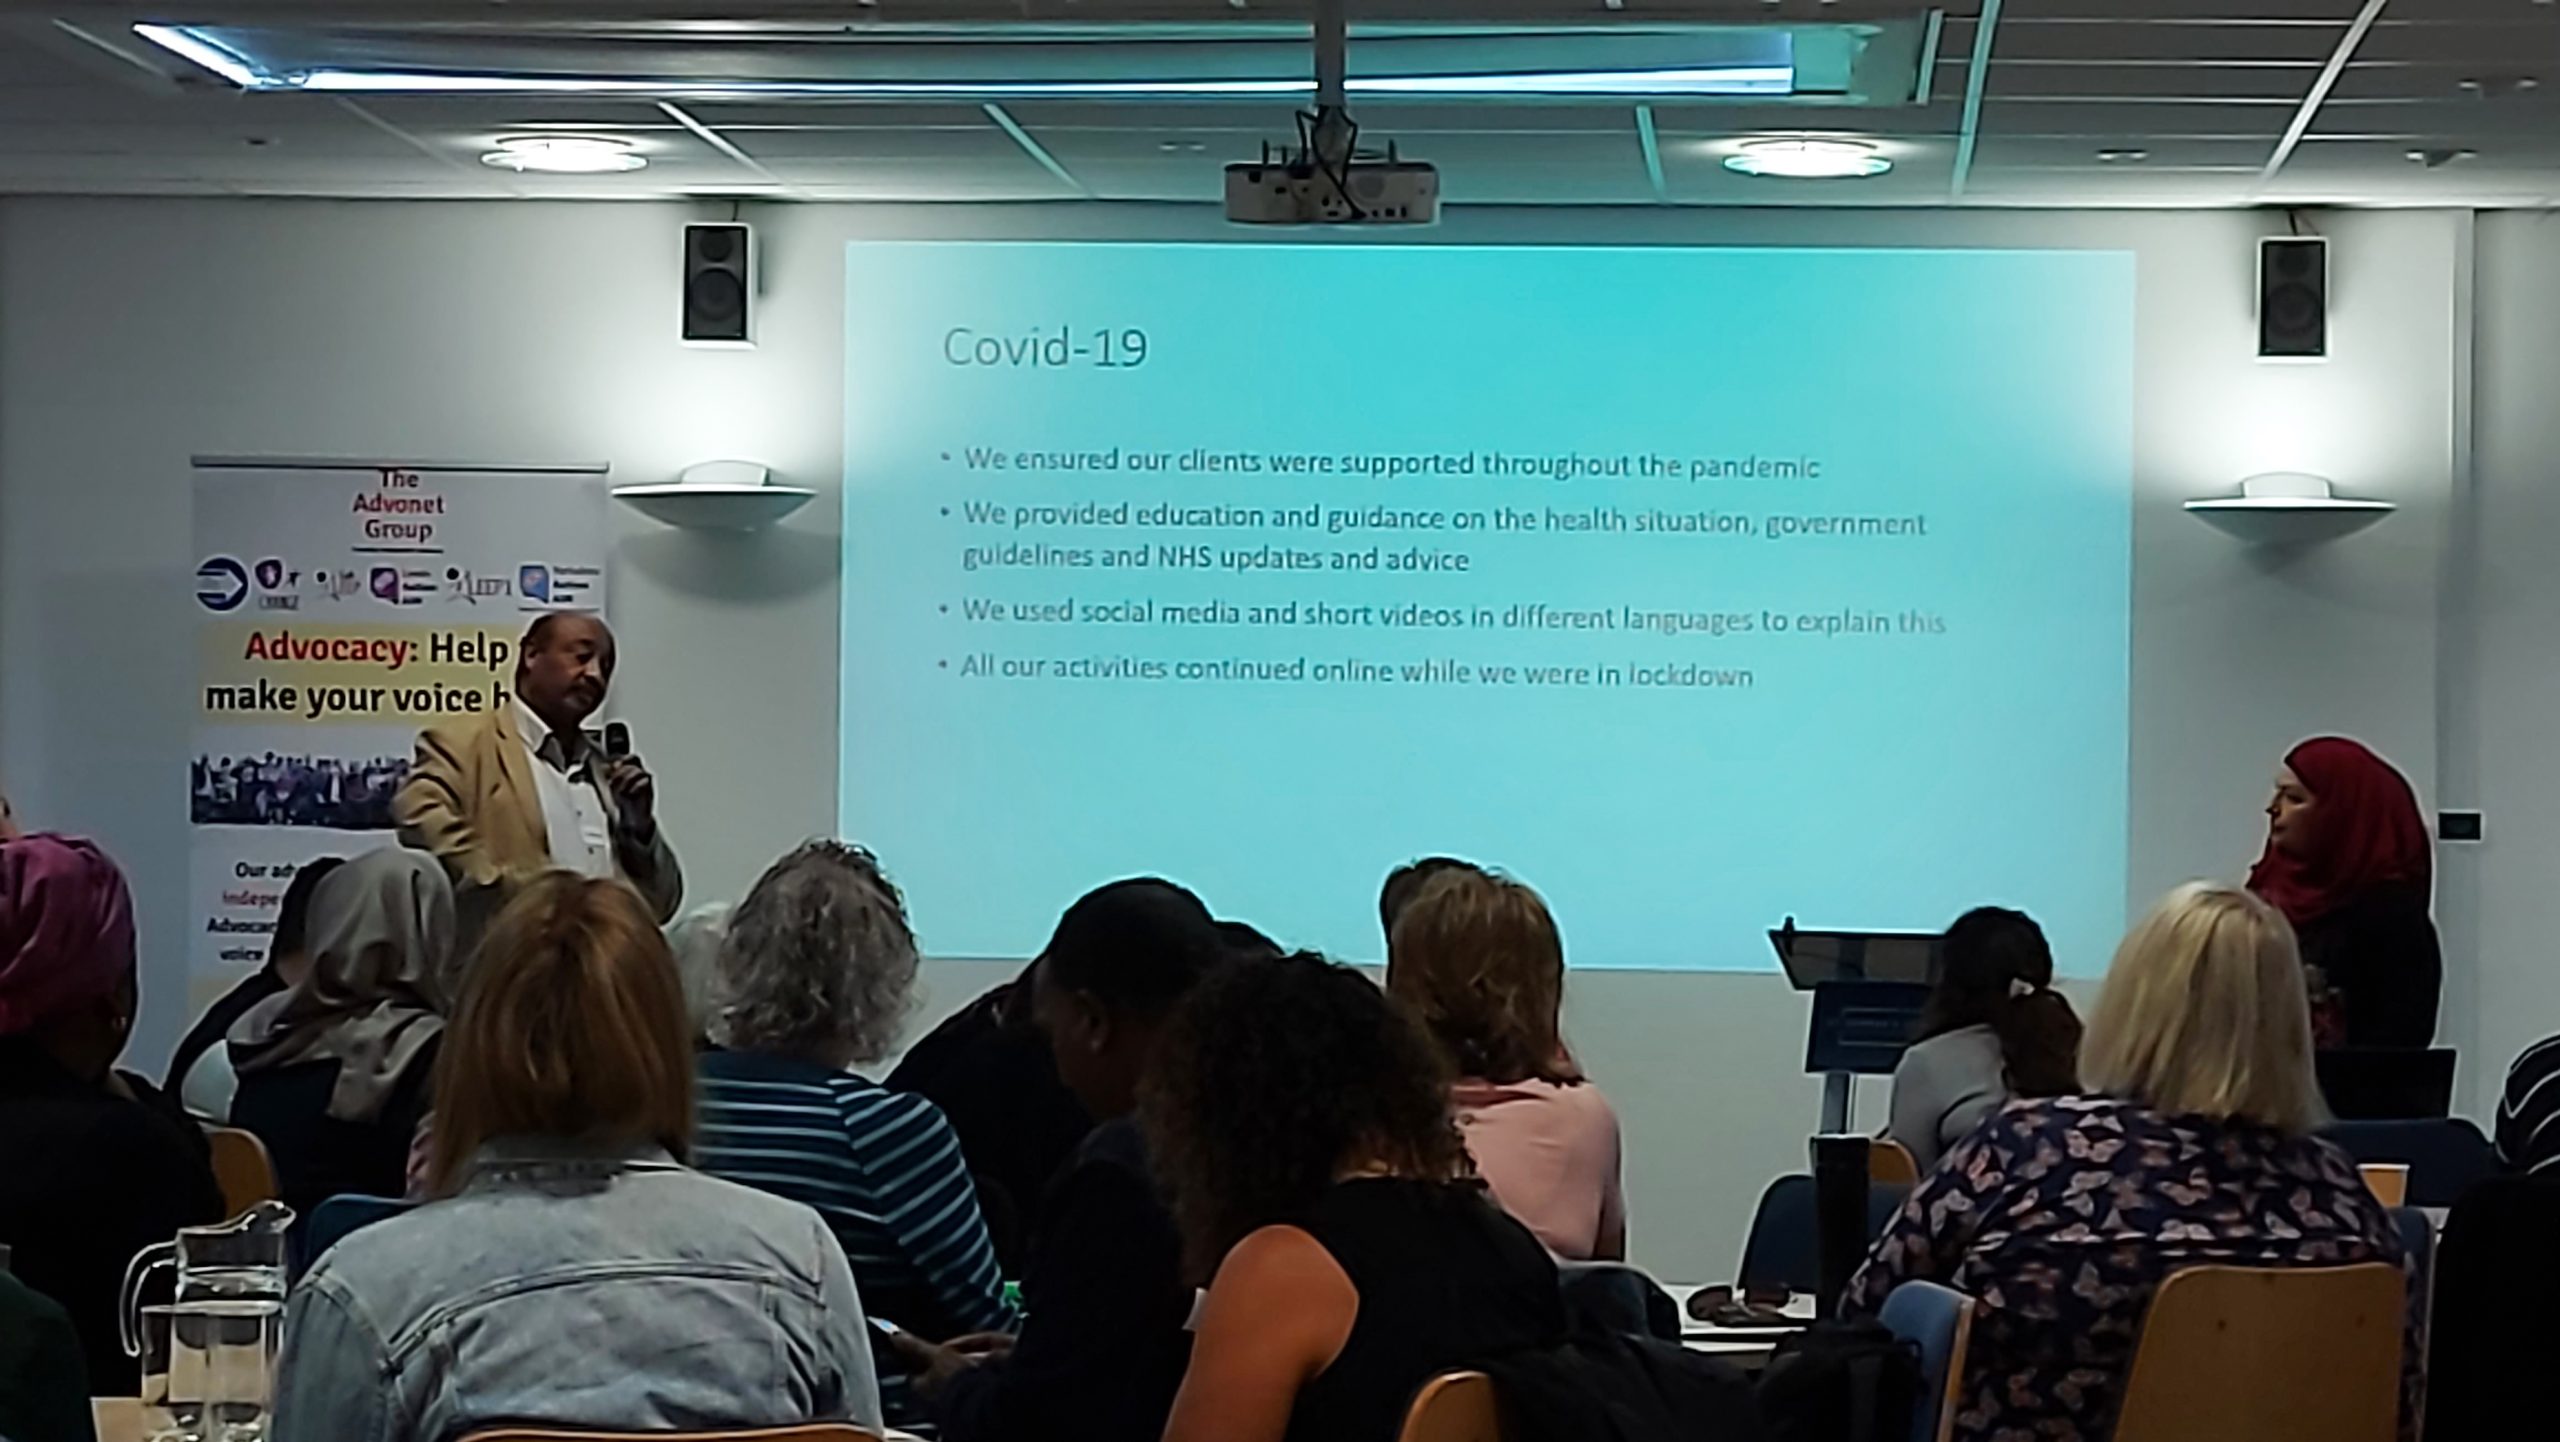 Ali from Leeds Refugee Forum, speaking in front of people about the impact of COVID-19 on the clients they worked with. This was at our Advocacy Development Fund event.